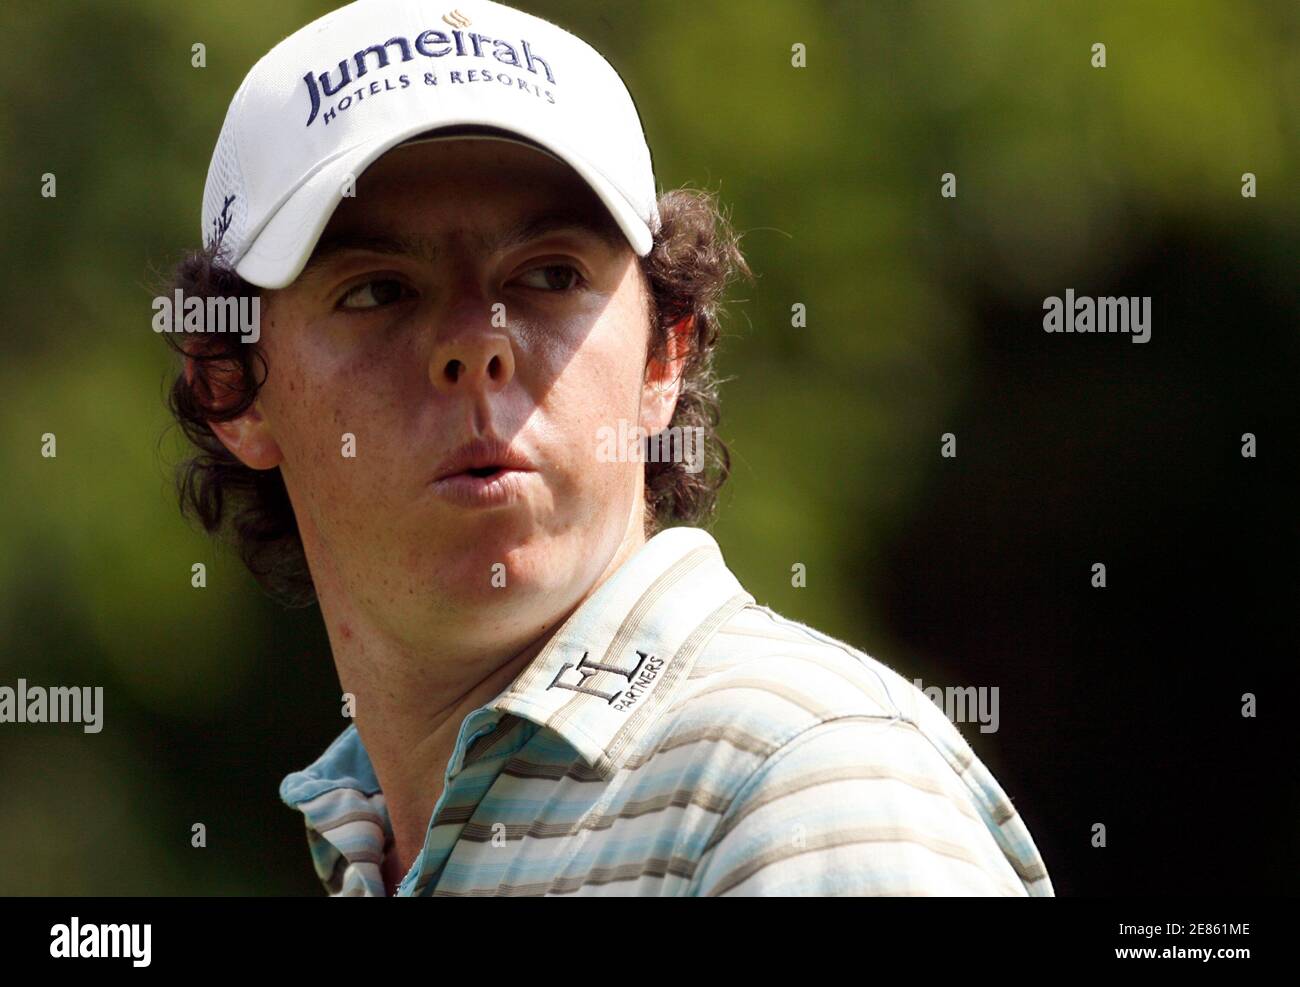 Rory McIlroy of Northern Ireland whistles as he walks down the 12th fairway during the final round of the Quail Hollow Championship in Charlotte, North Carolina May 2, 2010. REUTERS/Jason Miczek (UNITED STATES - Tags: SPORT GOLF) Stock Photo